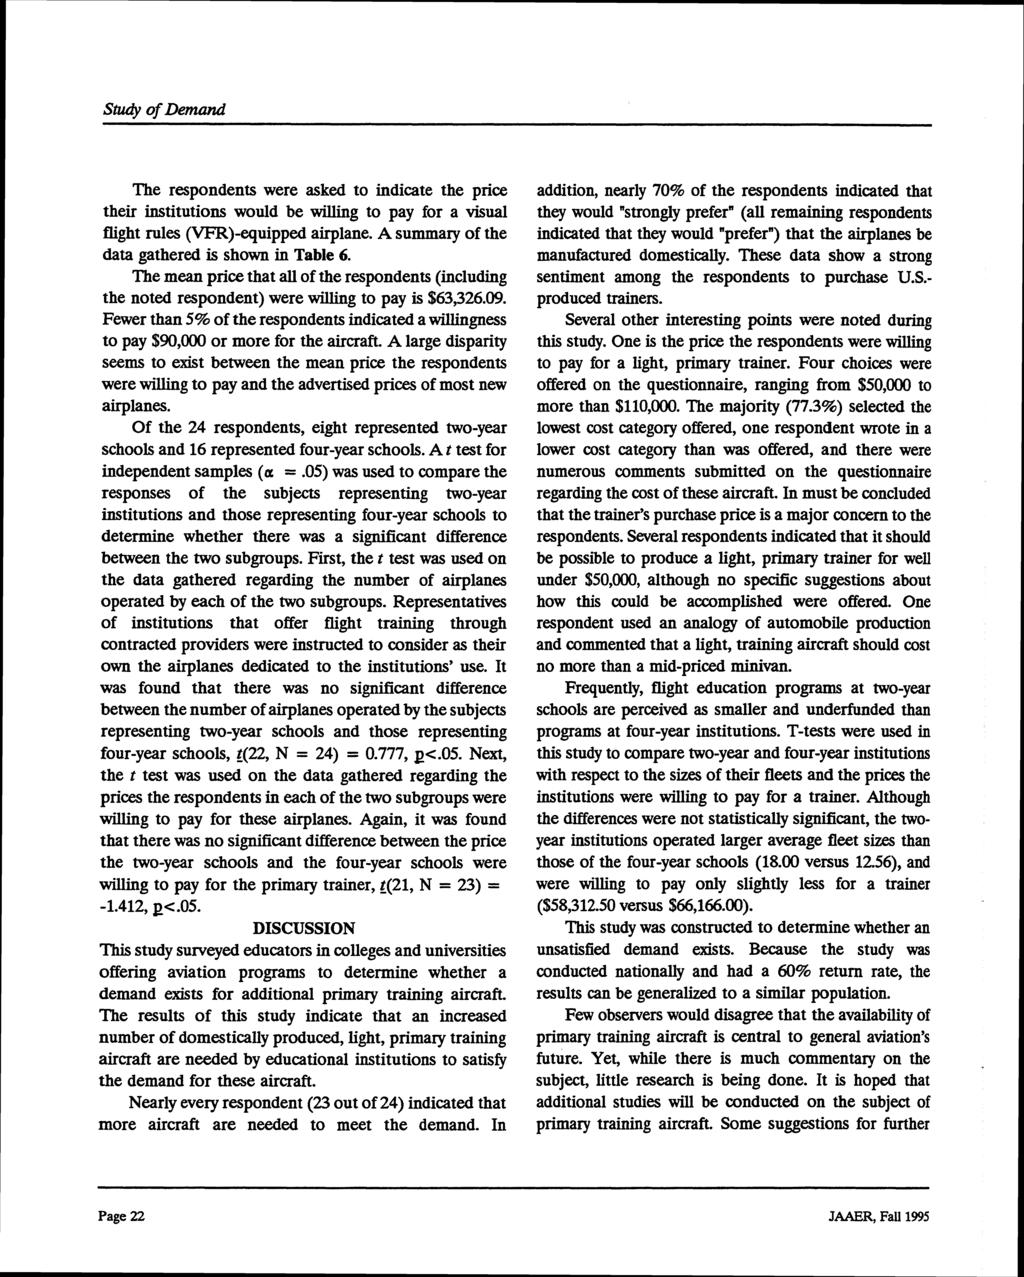 Journal of Aviation/Aerospace Education & Research, Vol. 6, No. 1 [1995], Art.